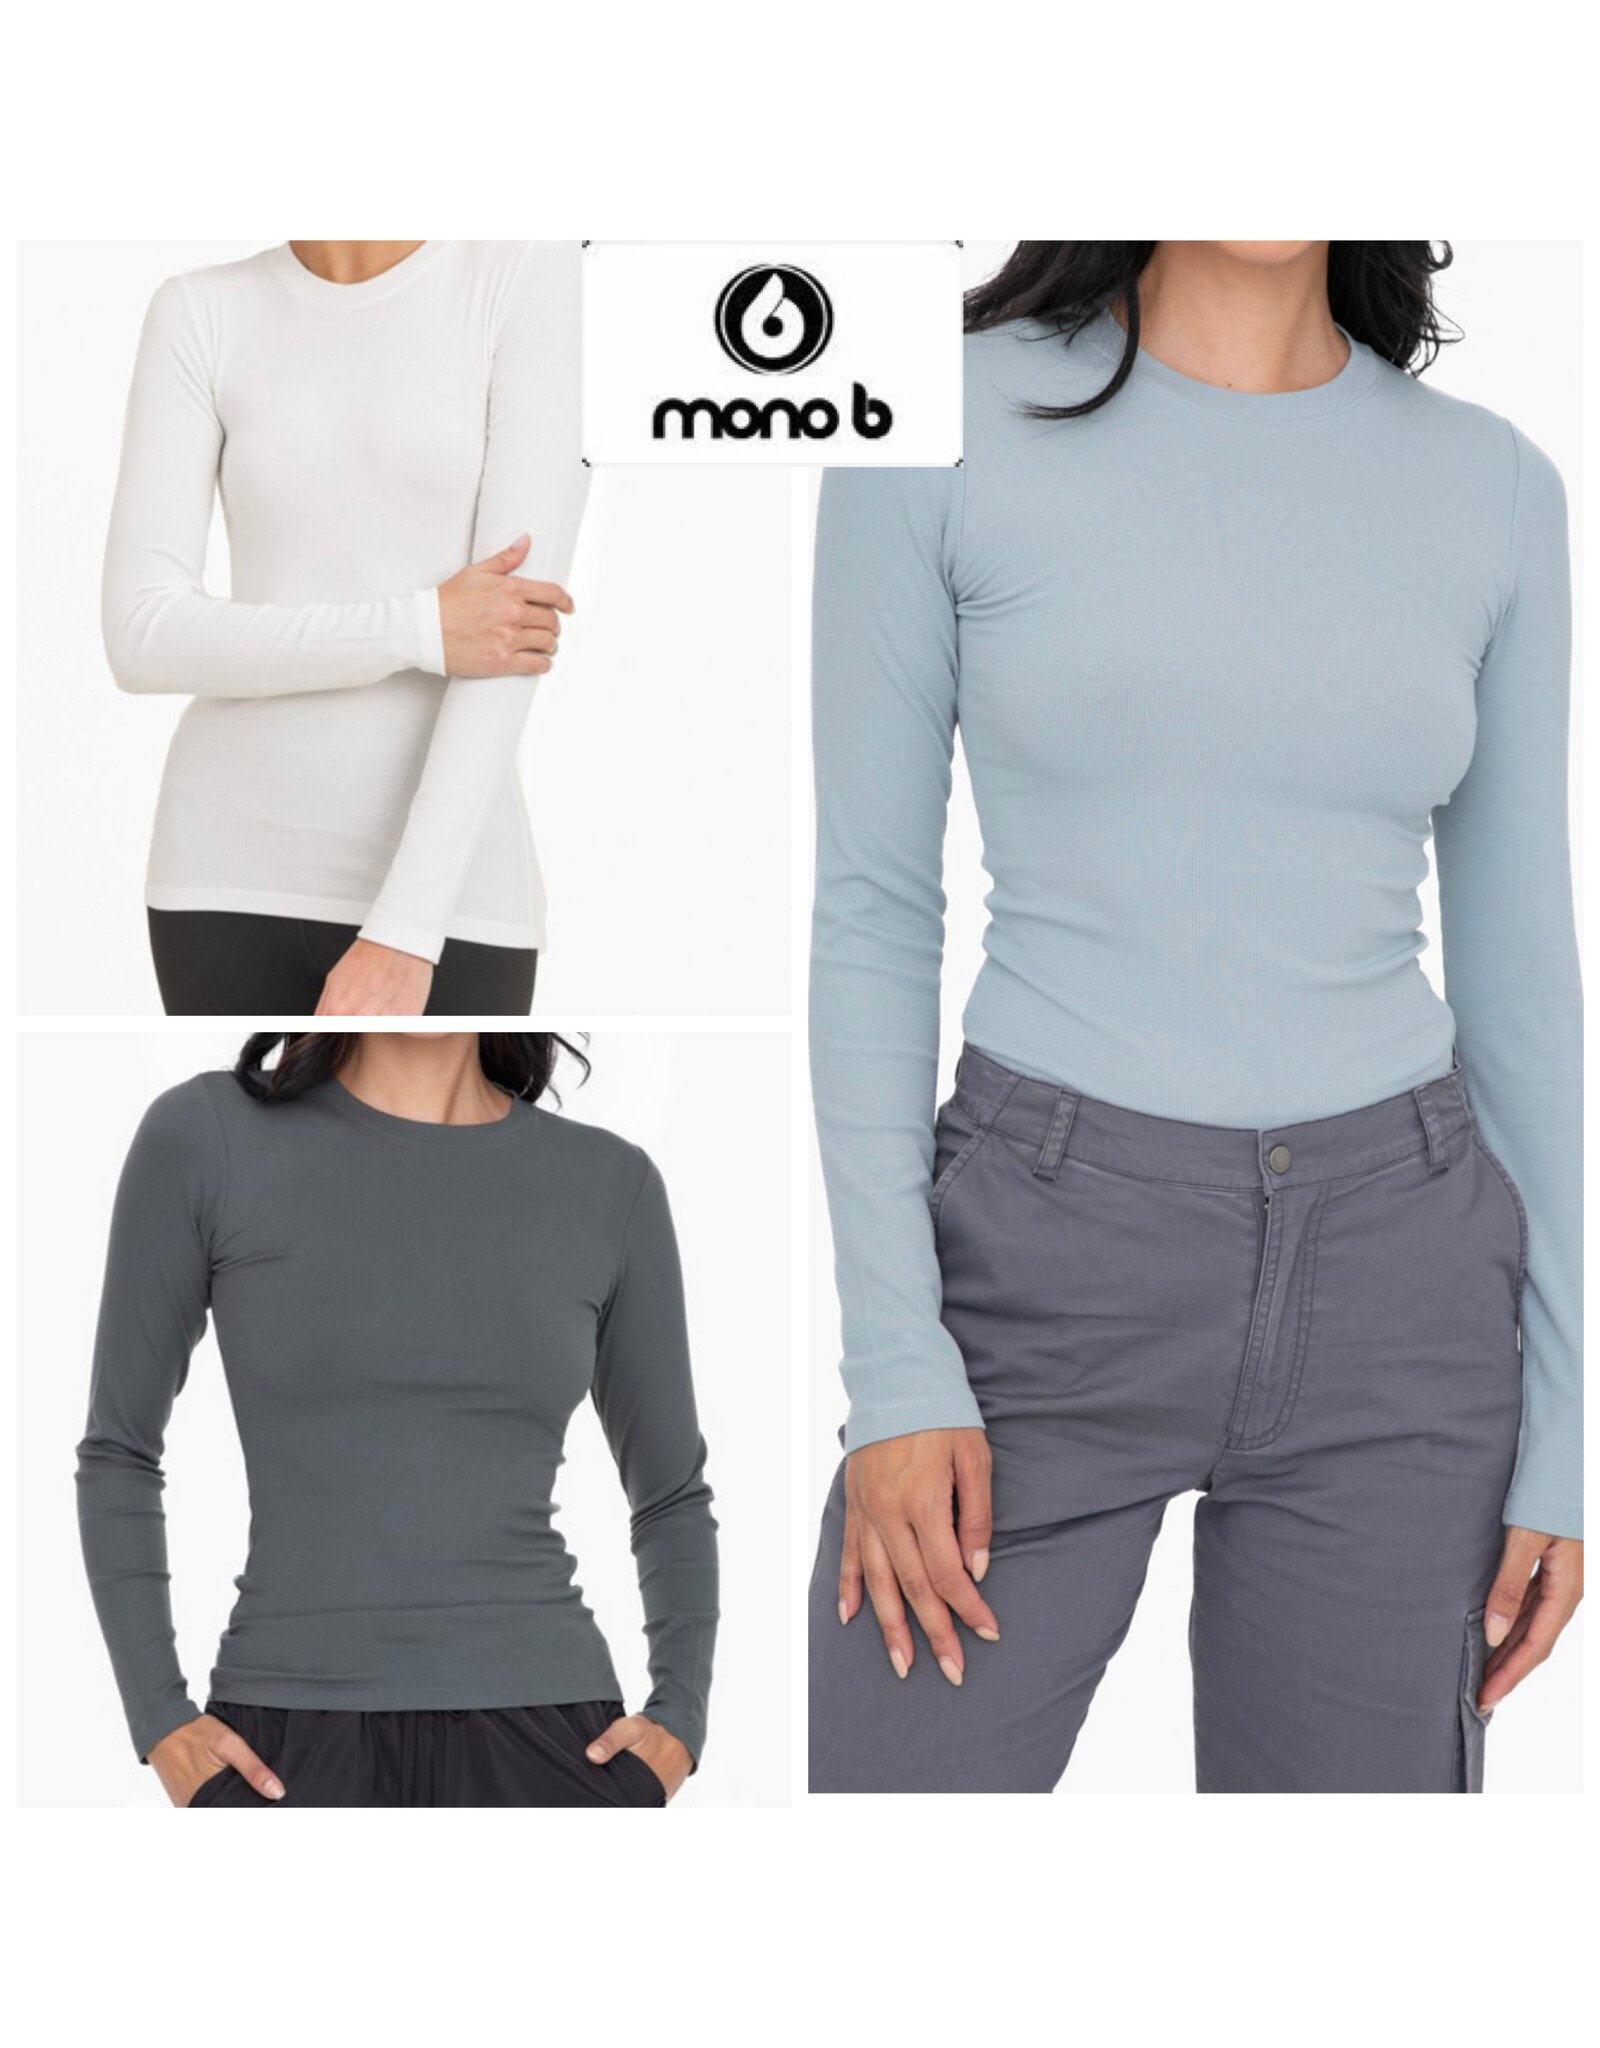 Mono b Essential Long -Sleeved Micro Ribbed Top - LA Trends Addict